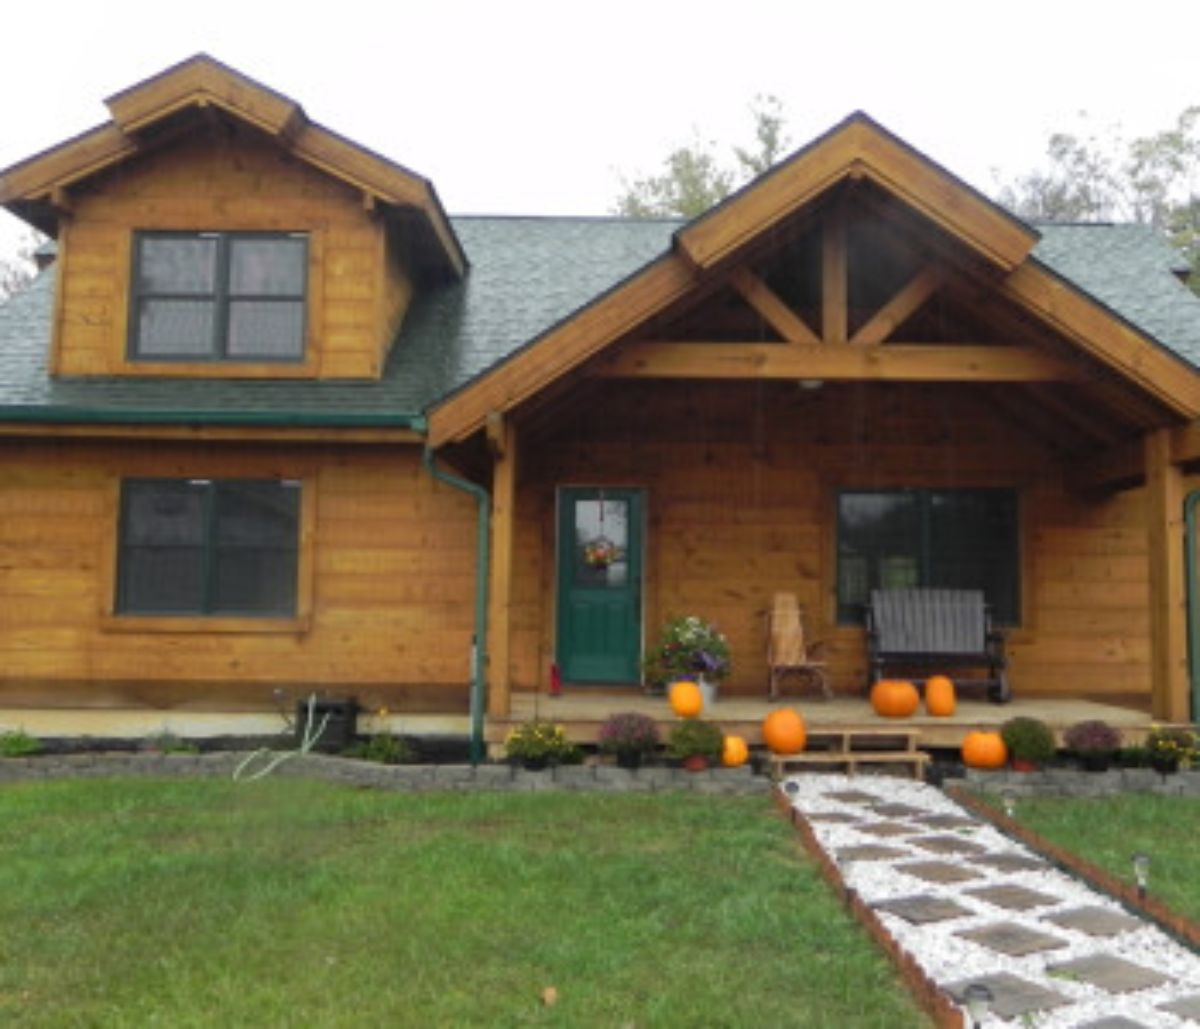 fronto f cabin with small porch and stone walkway with pumpkins on porch